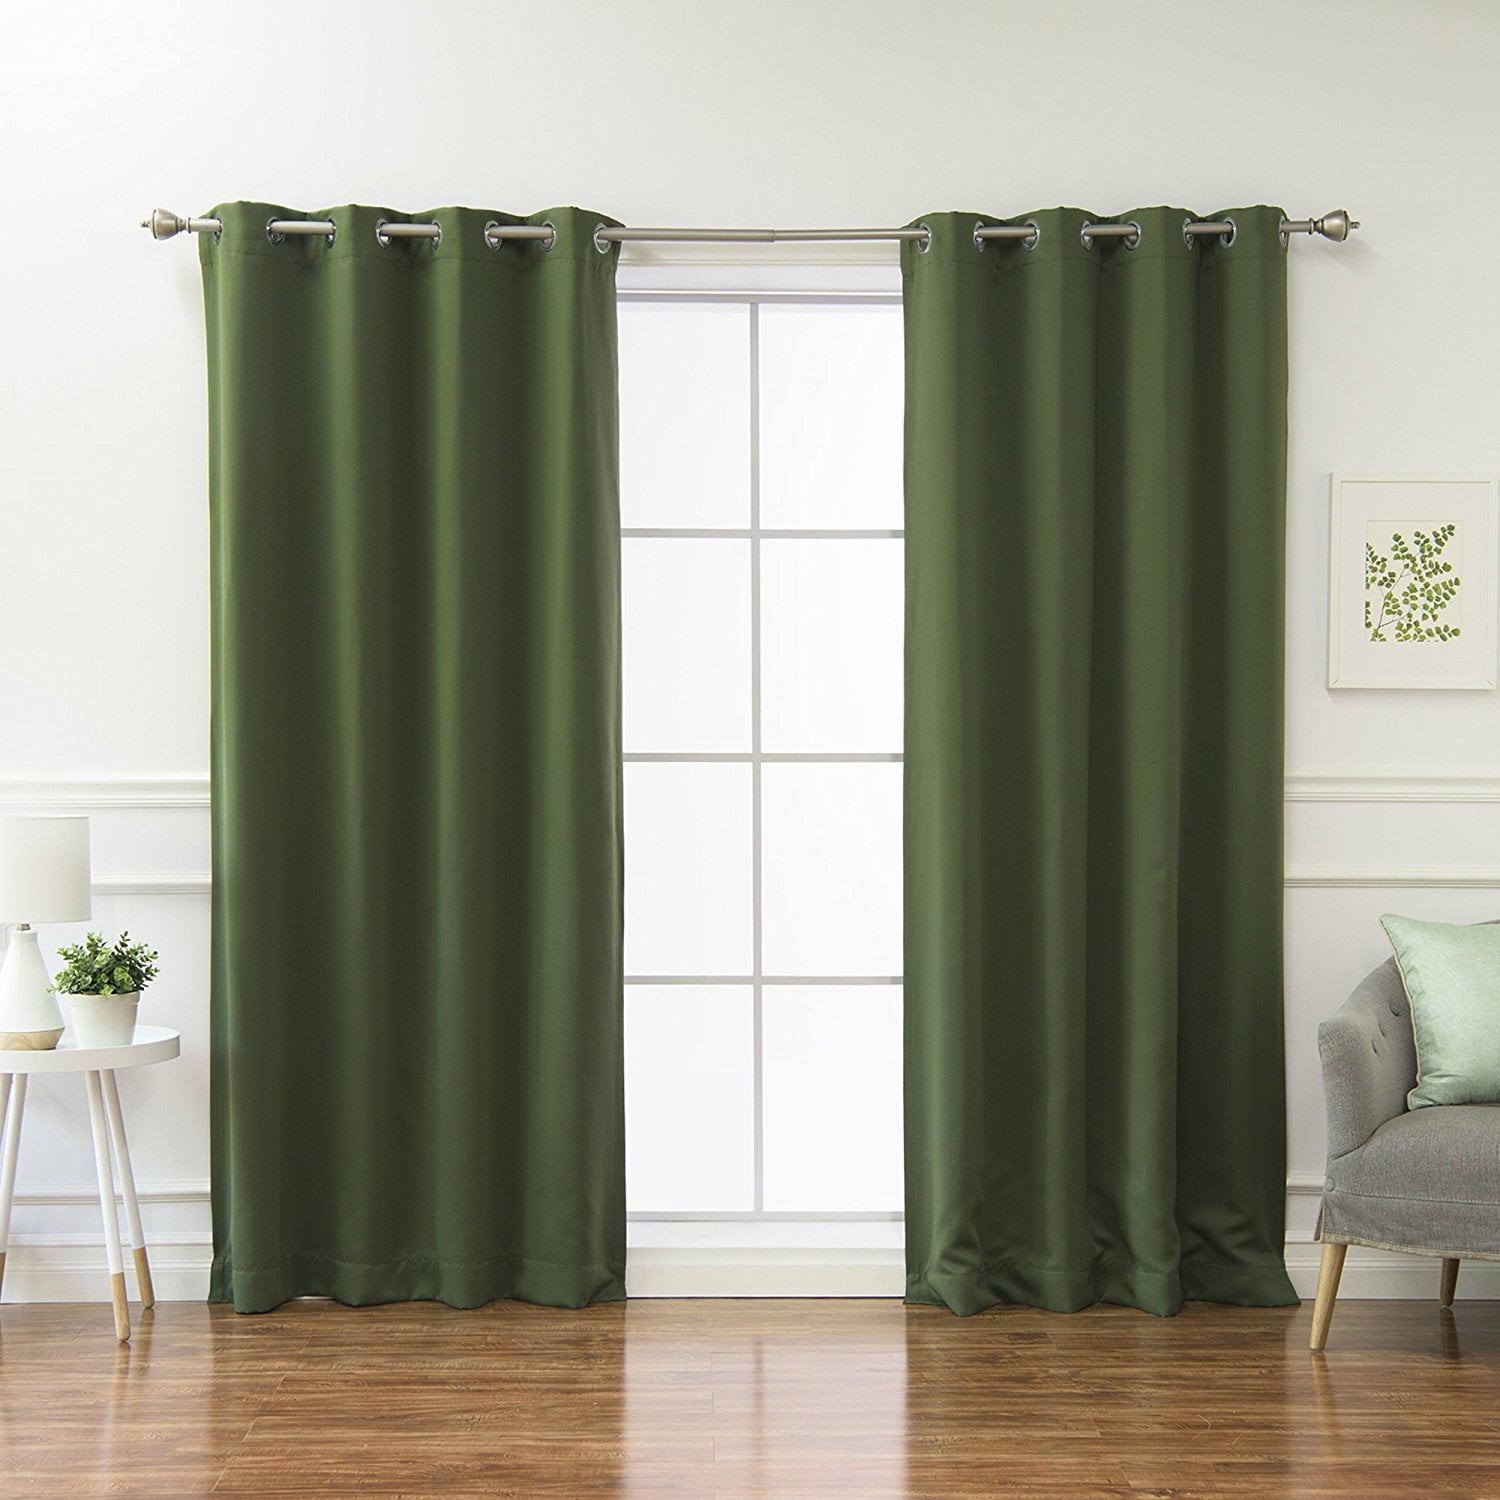 NEW Thermal Insulated Blackout Curtains Grommet Top Window Panels Drapes 